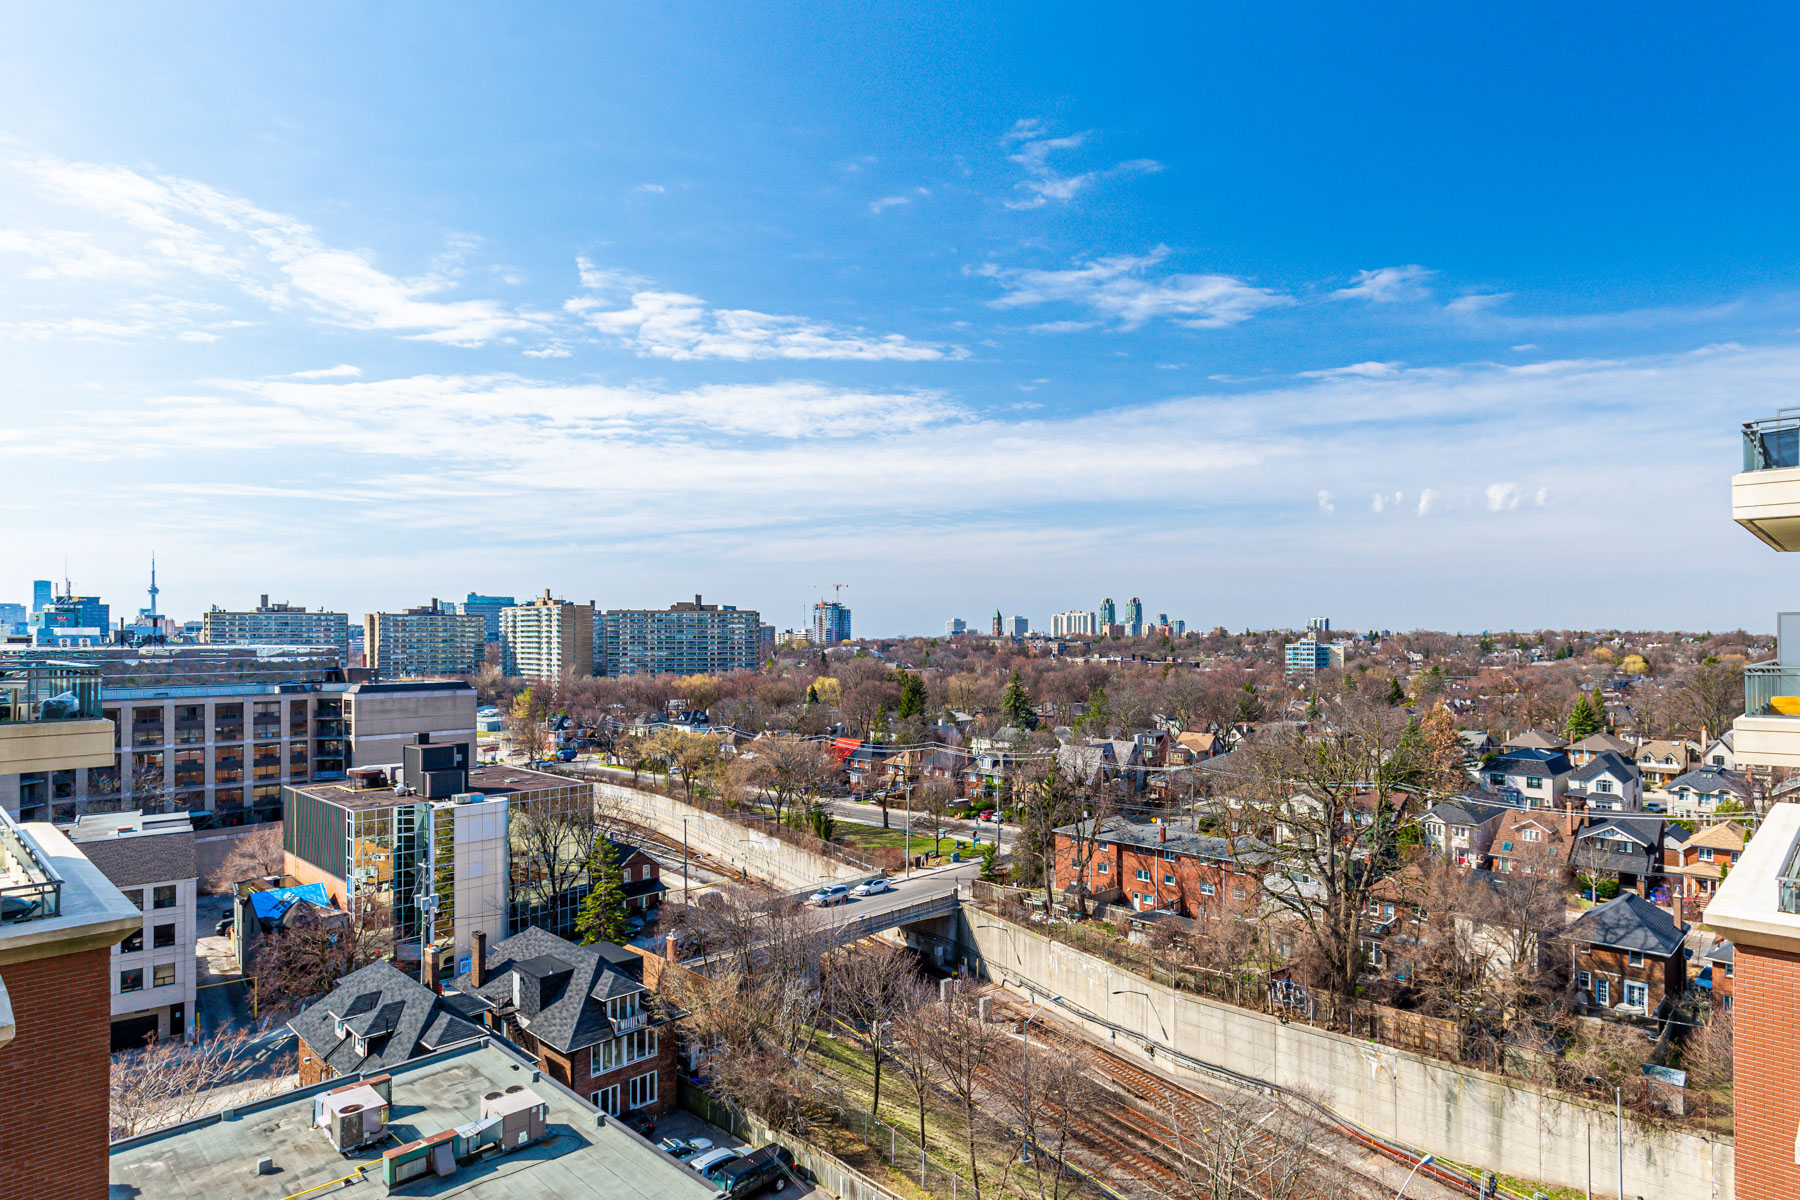 View of houses, buildings and trees of Midtown Toronto in foreground and downtown Toronto in background.